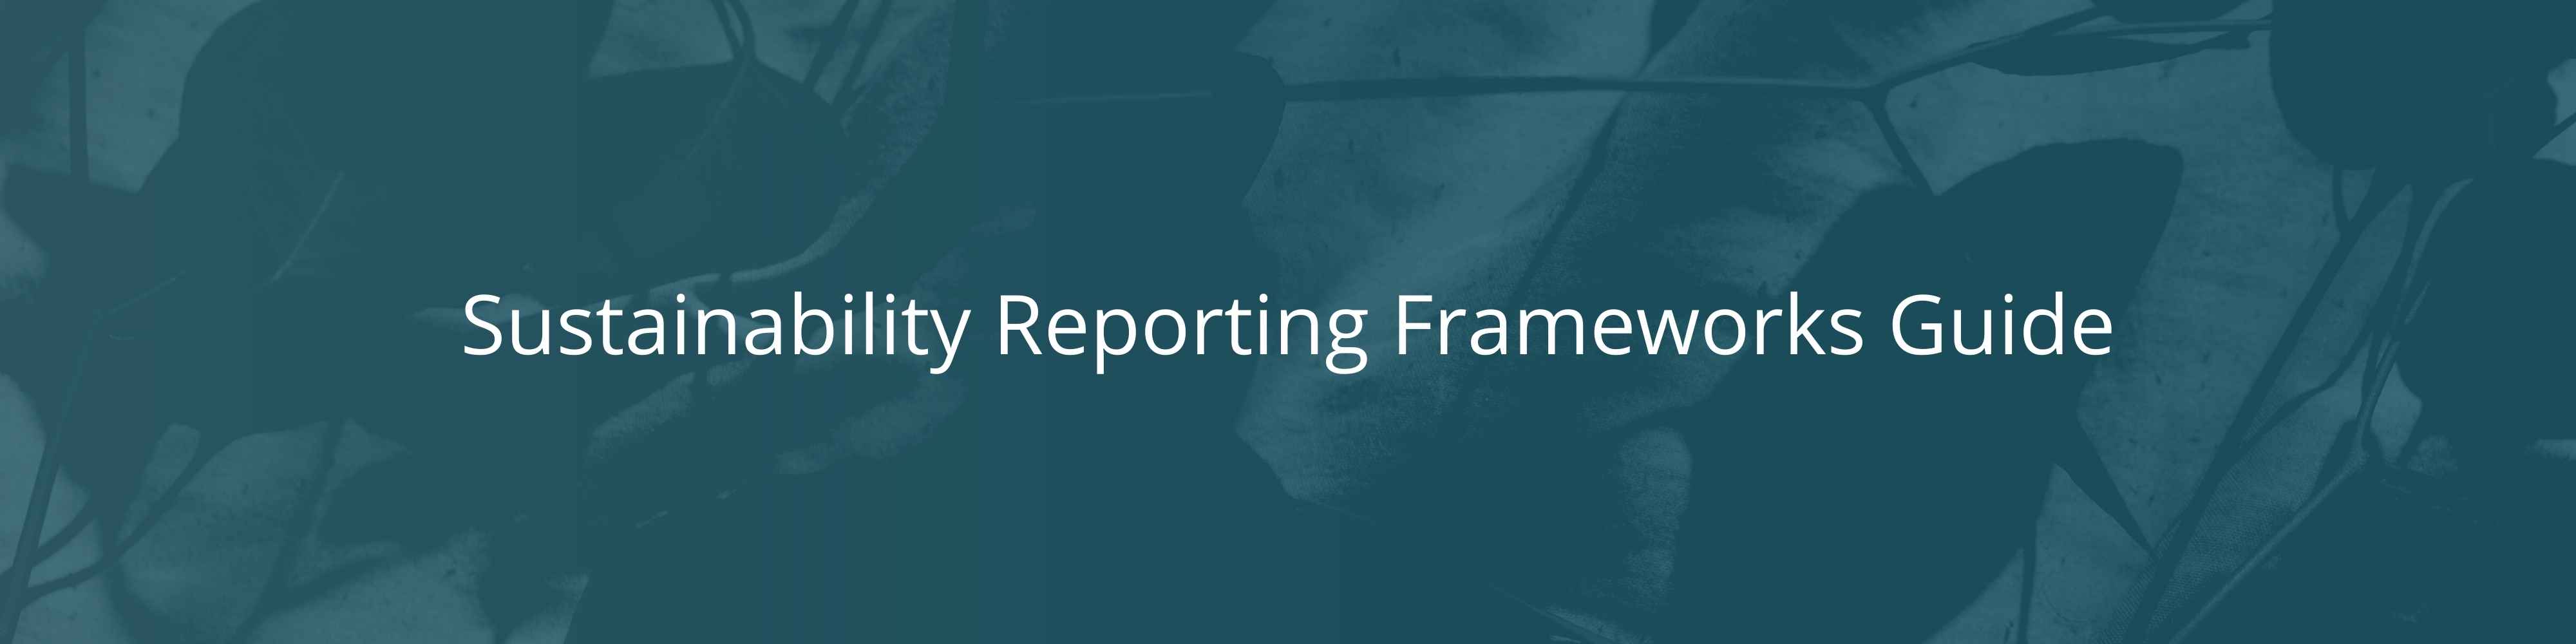 Sustainability Reporting Frameworks Guide